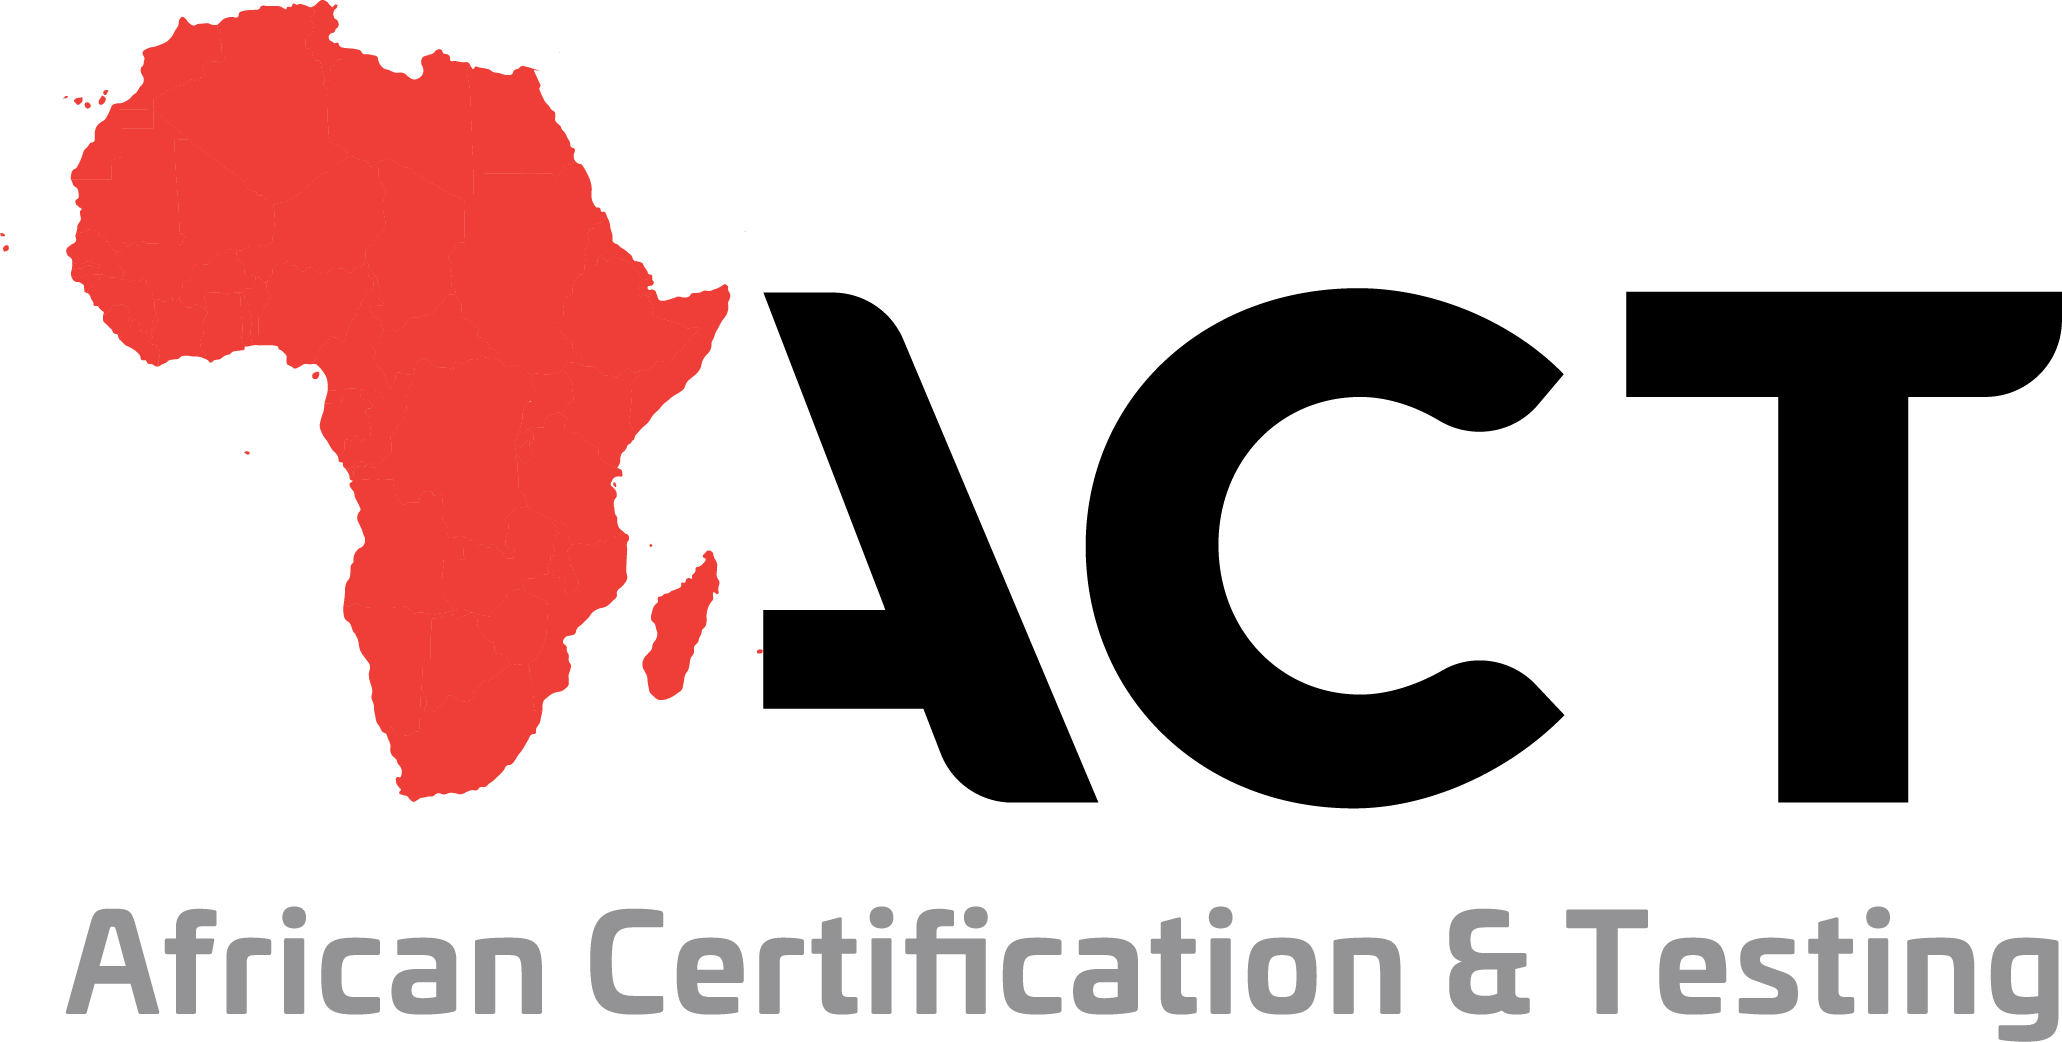 African Certification & Testing Act - African Continent Vector (2062x1042)